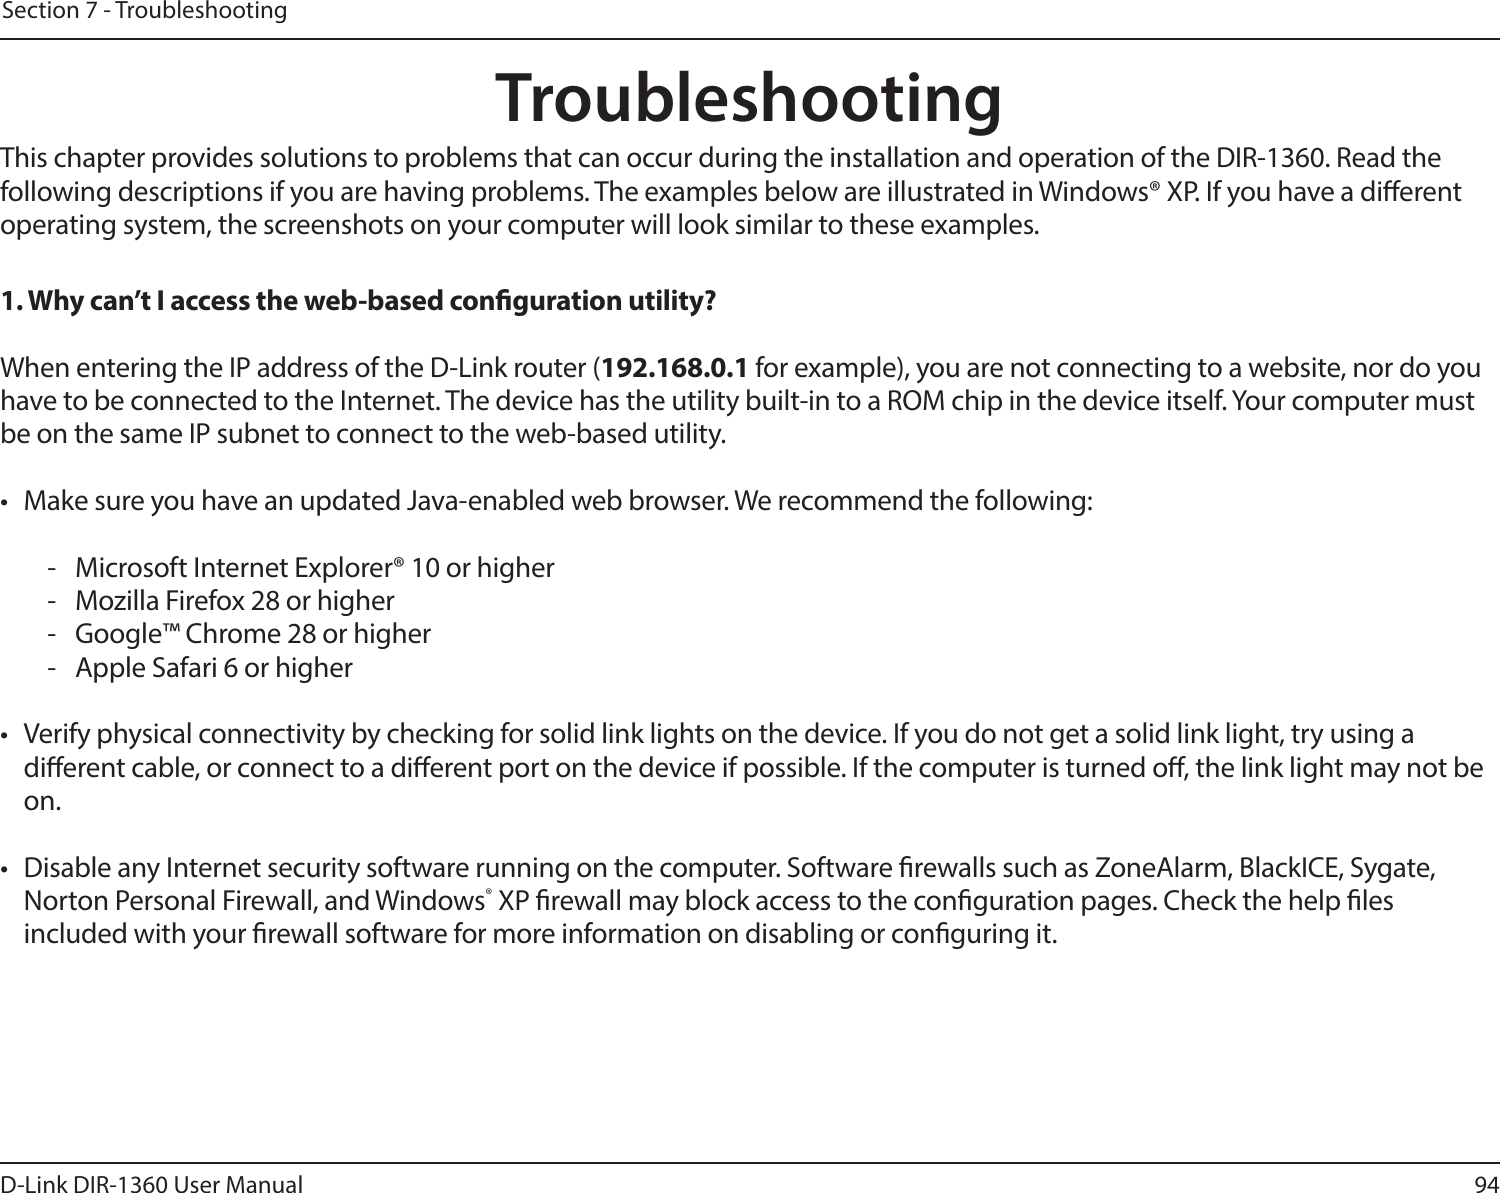 94D-Link DIR-1360 User ManualSection 7 - TroubleshootingTroubleshootingThis chapter provides solutions to problems that can occur during the installation and operation of the DIR-1360. Read the following descriptions if you are having problems. The examples below are illustrated in Windows® XP. If you have a dierent operating system, the screenshots on your computer will look similar to these examples.1. Why can’t I access the web-based conguration utility?When entering the IP address of the D-Link router (192.168.0.1 for example), you are not connecting to a website, nor do you have to be connected to the Internet. The device has the utility built-in to a ROM chip in the device itself. Your computer must be on the same IP subnet to connect to the web-based utility. •  Make sure you have an updated Java-enabled web browser. We recommend the following:  -  Microsoft Internet Explorer® 10 or higher-  Mozilla Firefox 28 or higher-  Google™ Chrome 28 or higher-  Apple Safari 6 or higher•  Verify physical connectivity by checking for solid link lights on the device. If you do not get a solid link light, try using a dierent cable, or connect to a dierent port on the device if possible. If the computer is turned o, the link light may not be on.•  Disable any Internet security software running on the computer. Software rewalls such as ZoneAlarm, BlackICE, Sygate, Norton Personal Firewall, and Windows® XP rewall may block access to the conguration pages. Check the help les included with your rewall software for more information on disabling or conguring it.